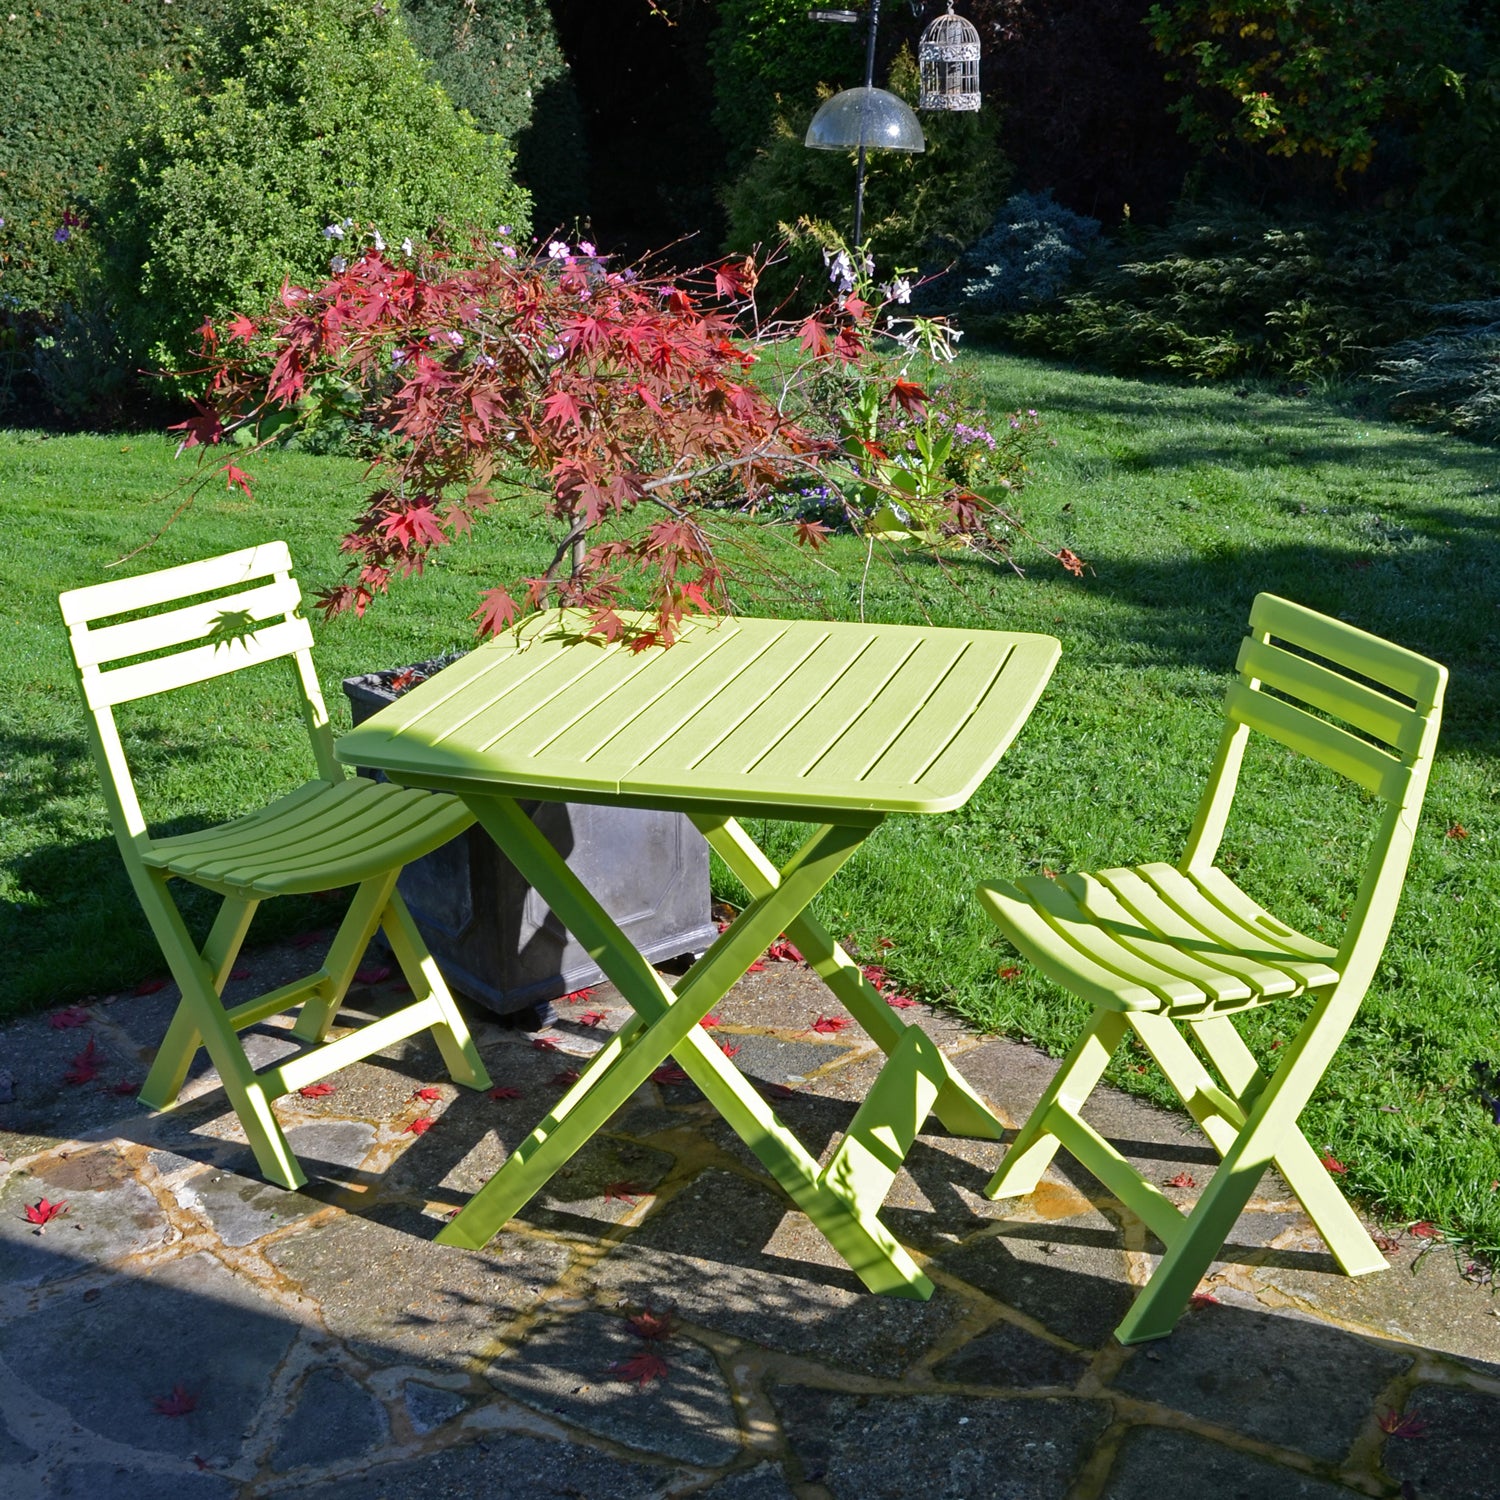 Trabella Brescia Folding Table with 2 Brescia Chairs Set Lime Dining Sets Trabella   